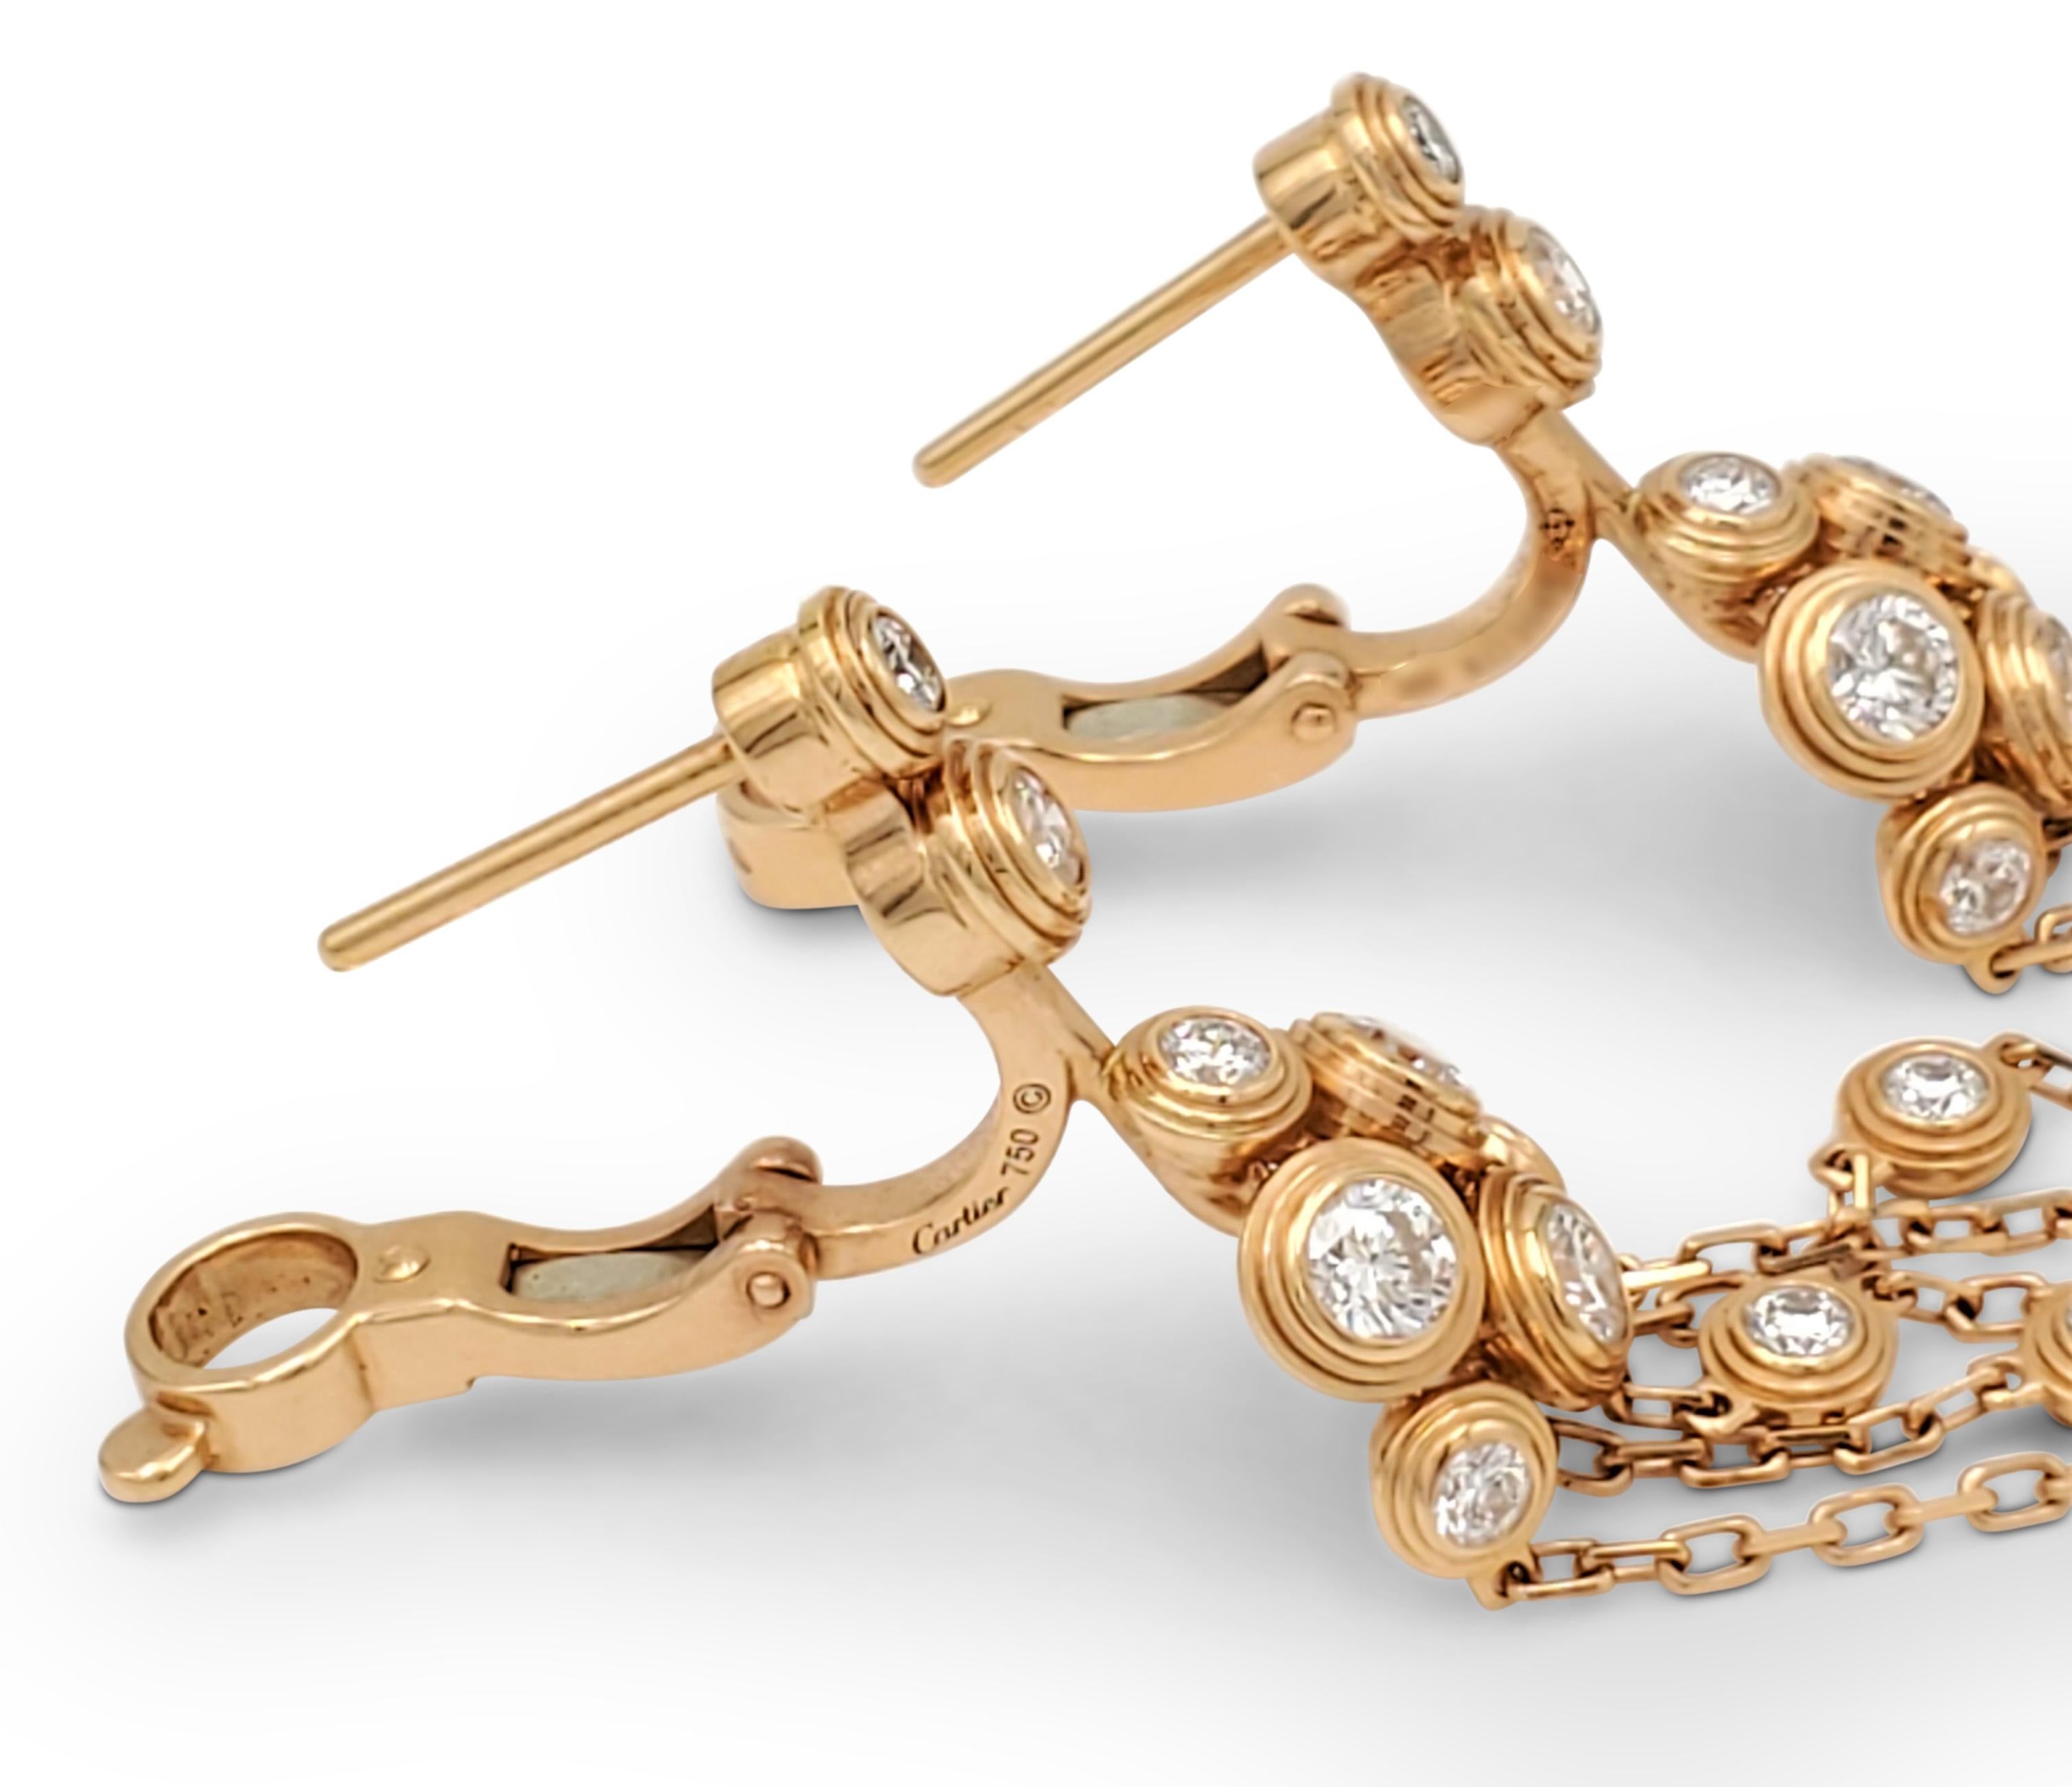 Authentic elegant Cartier 'Diamants Légers' earrings crafted in 18 karat yellow gold feature a series of diamonds set on lightweight gold chains. The earrings are set with high-quality diamonds weighing an estimated 1.45 carats (E-F color, VS